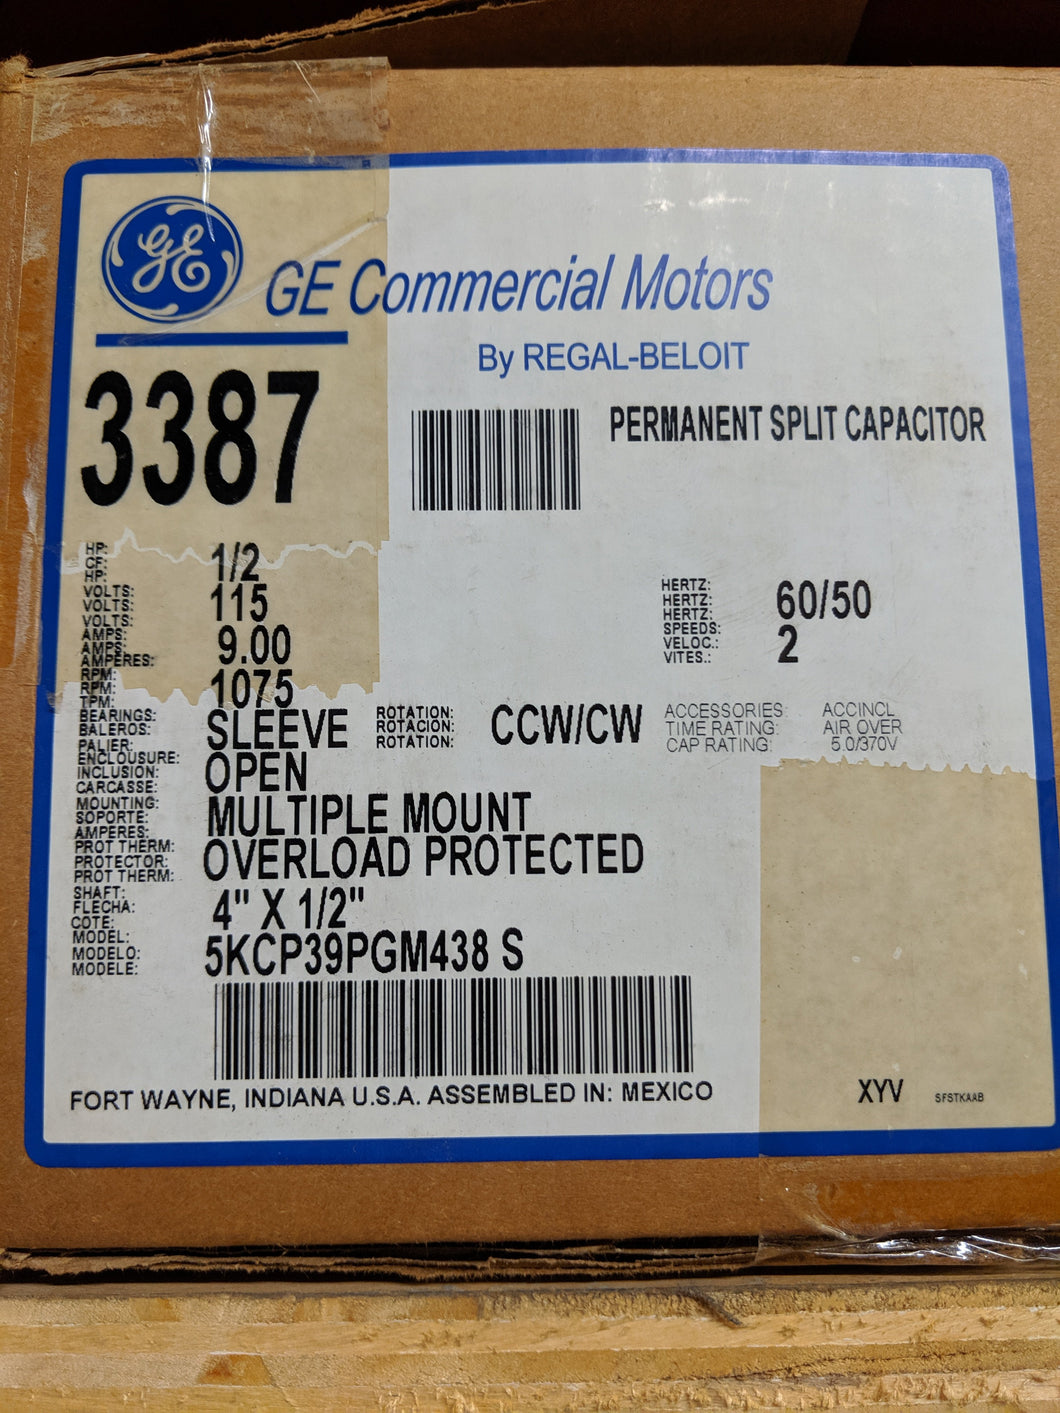 GE 3387, 1/2 HP, 115 Volts, 5KCP39PGM438S